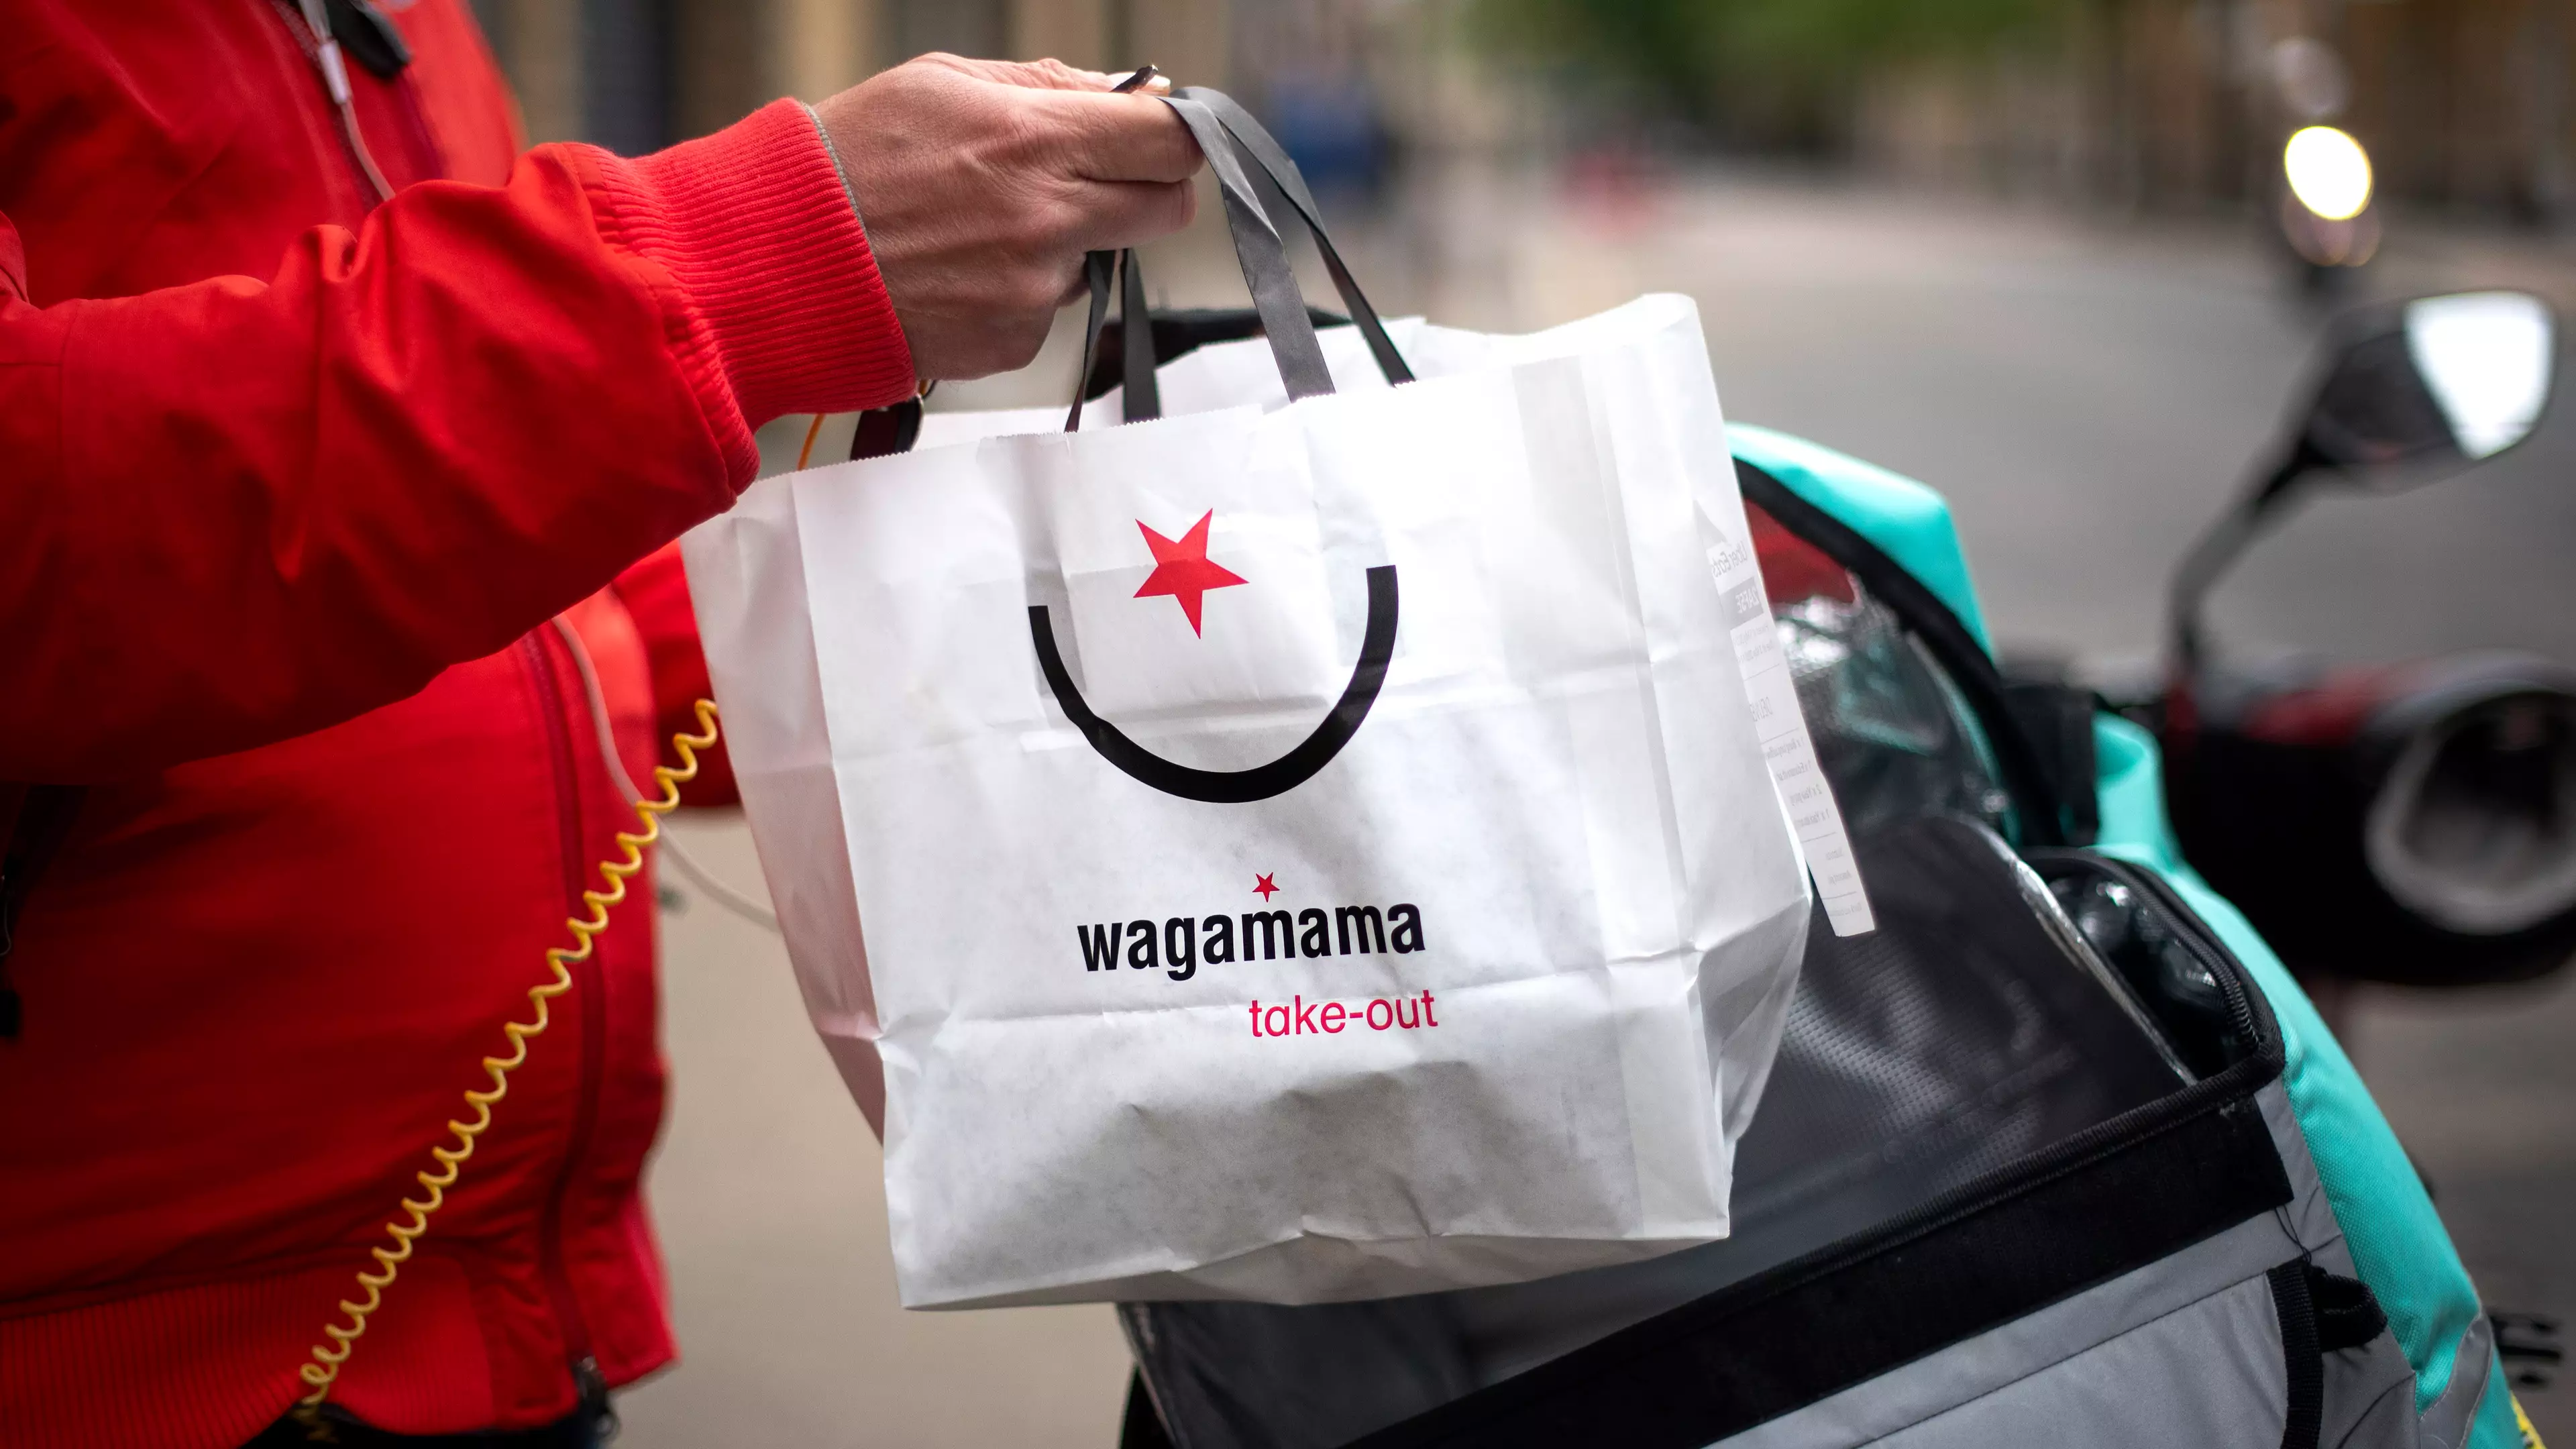 Someone Ordered 13 Katsu Sauces And Nothing Else From Wagamama - And They Want To Know Who